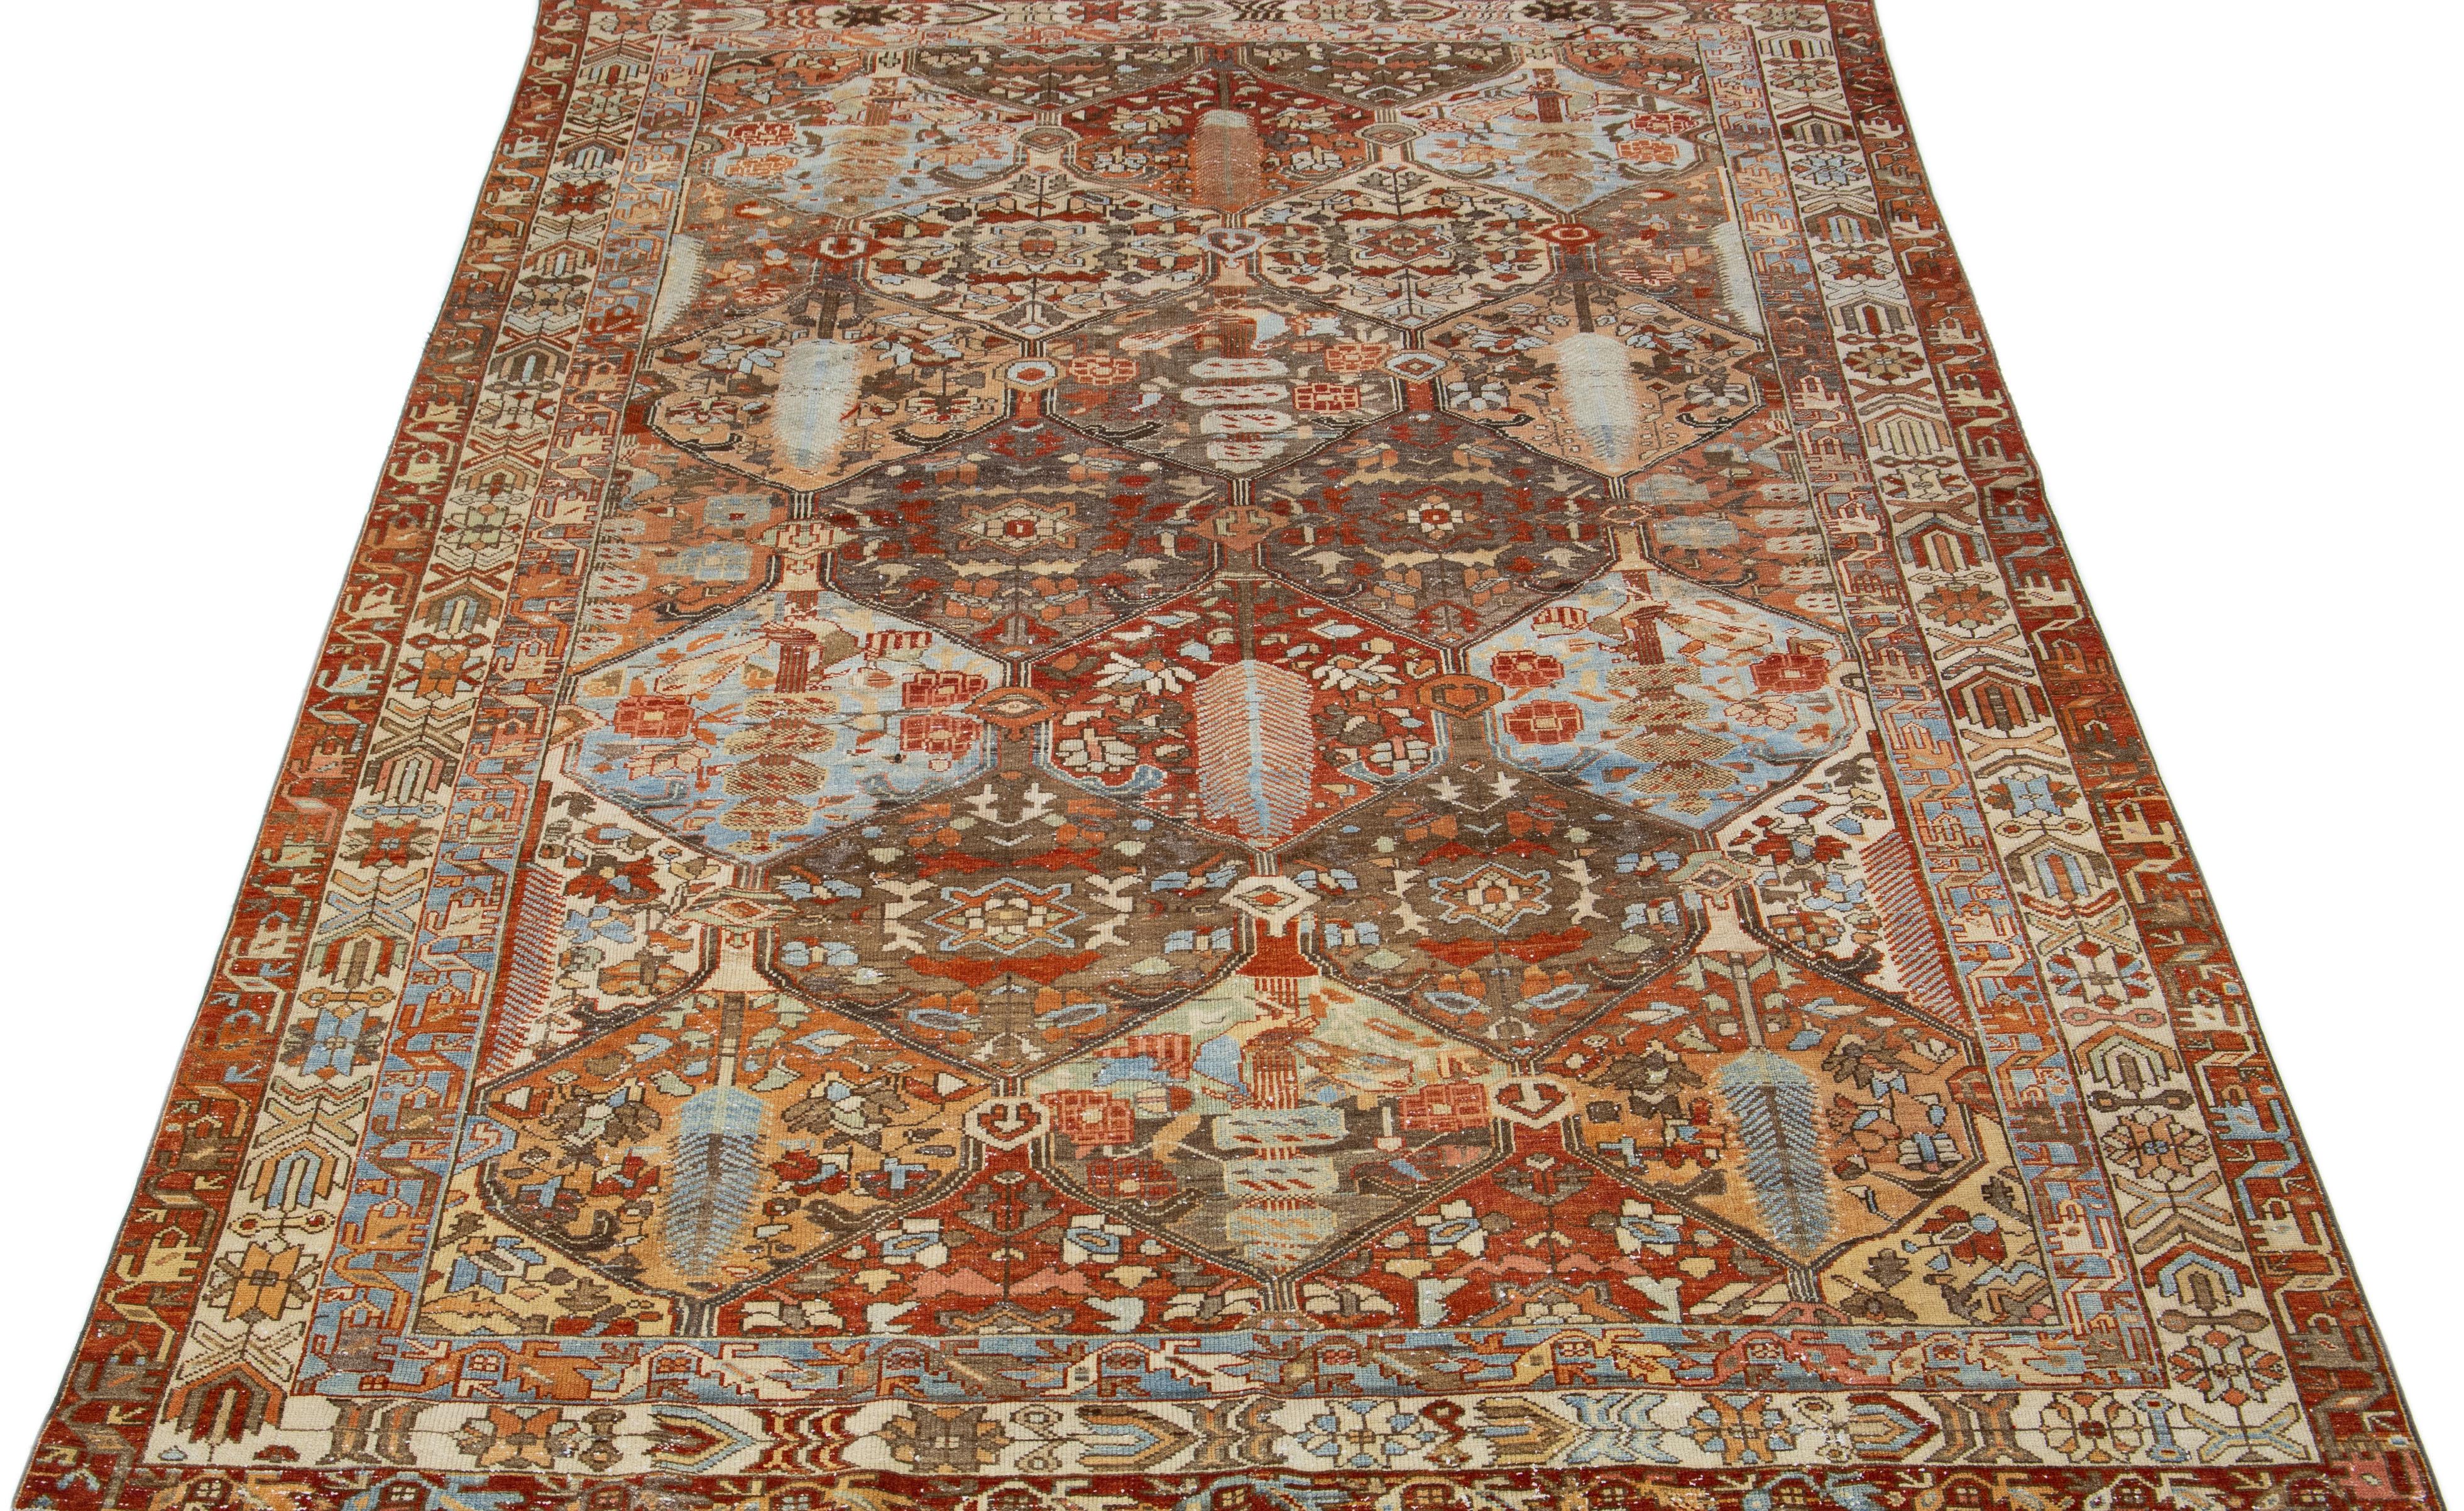 Beautiful Antique Bakhtiari hand-knotted wool rug with a gray color field. This Persian piece has a classic geometric floral design in blue and rust colors.

This rug measures 6'10